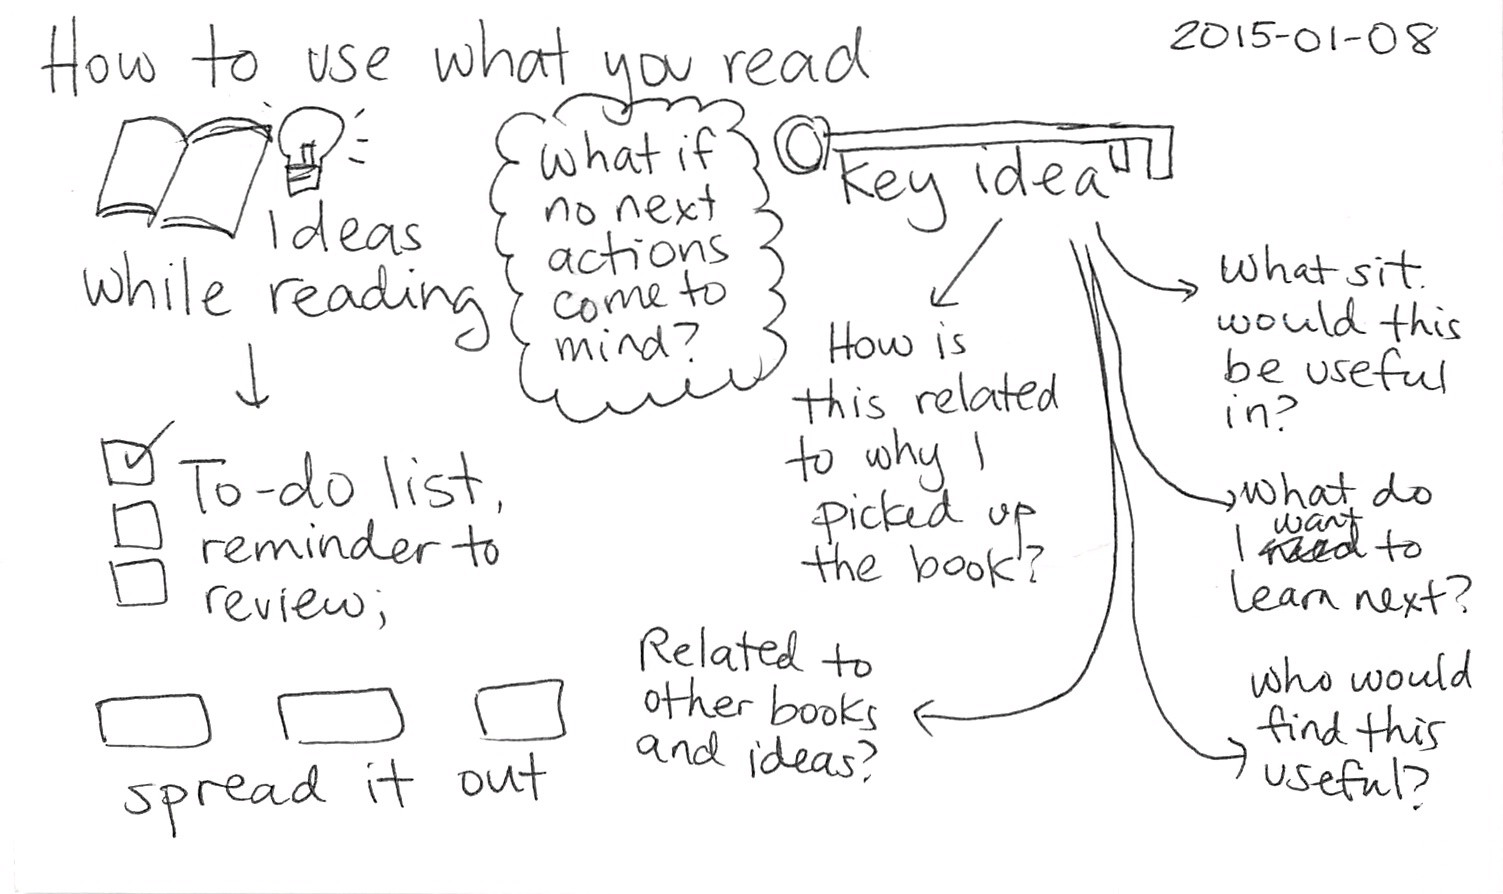 2015-01-08 How to use what you read -- index card